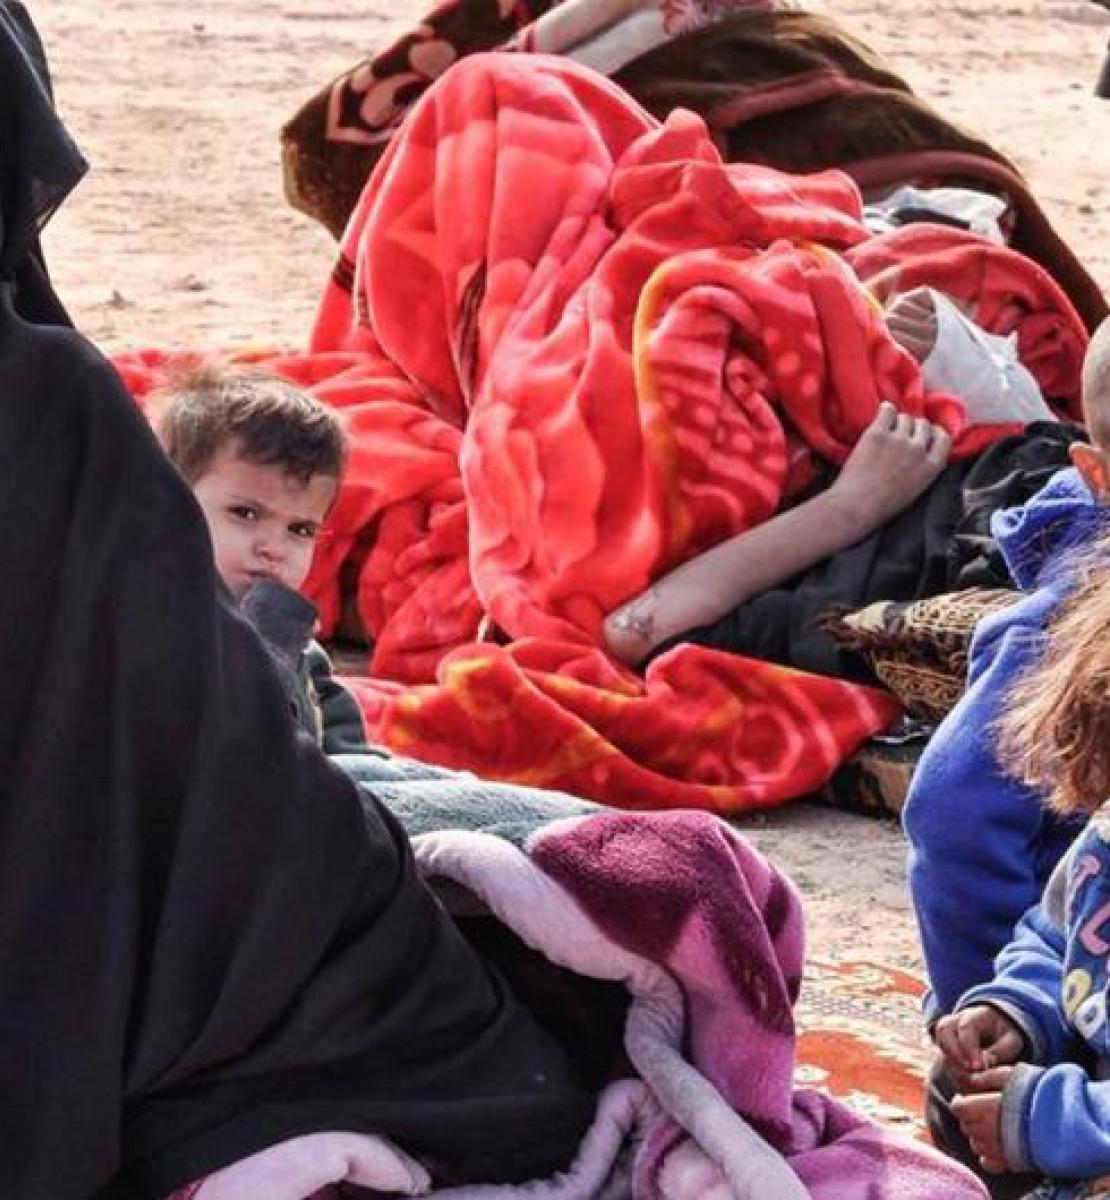 A displaced family in the Al-Hol camp in Syria.